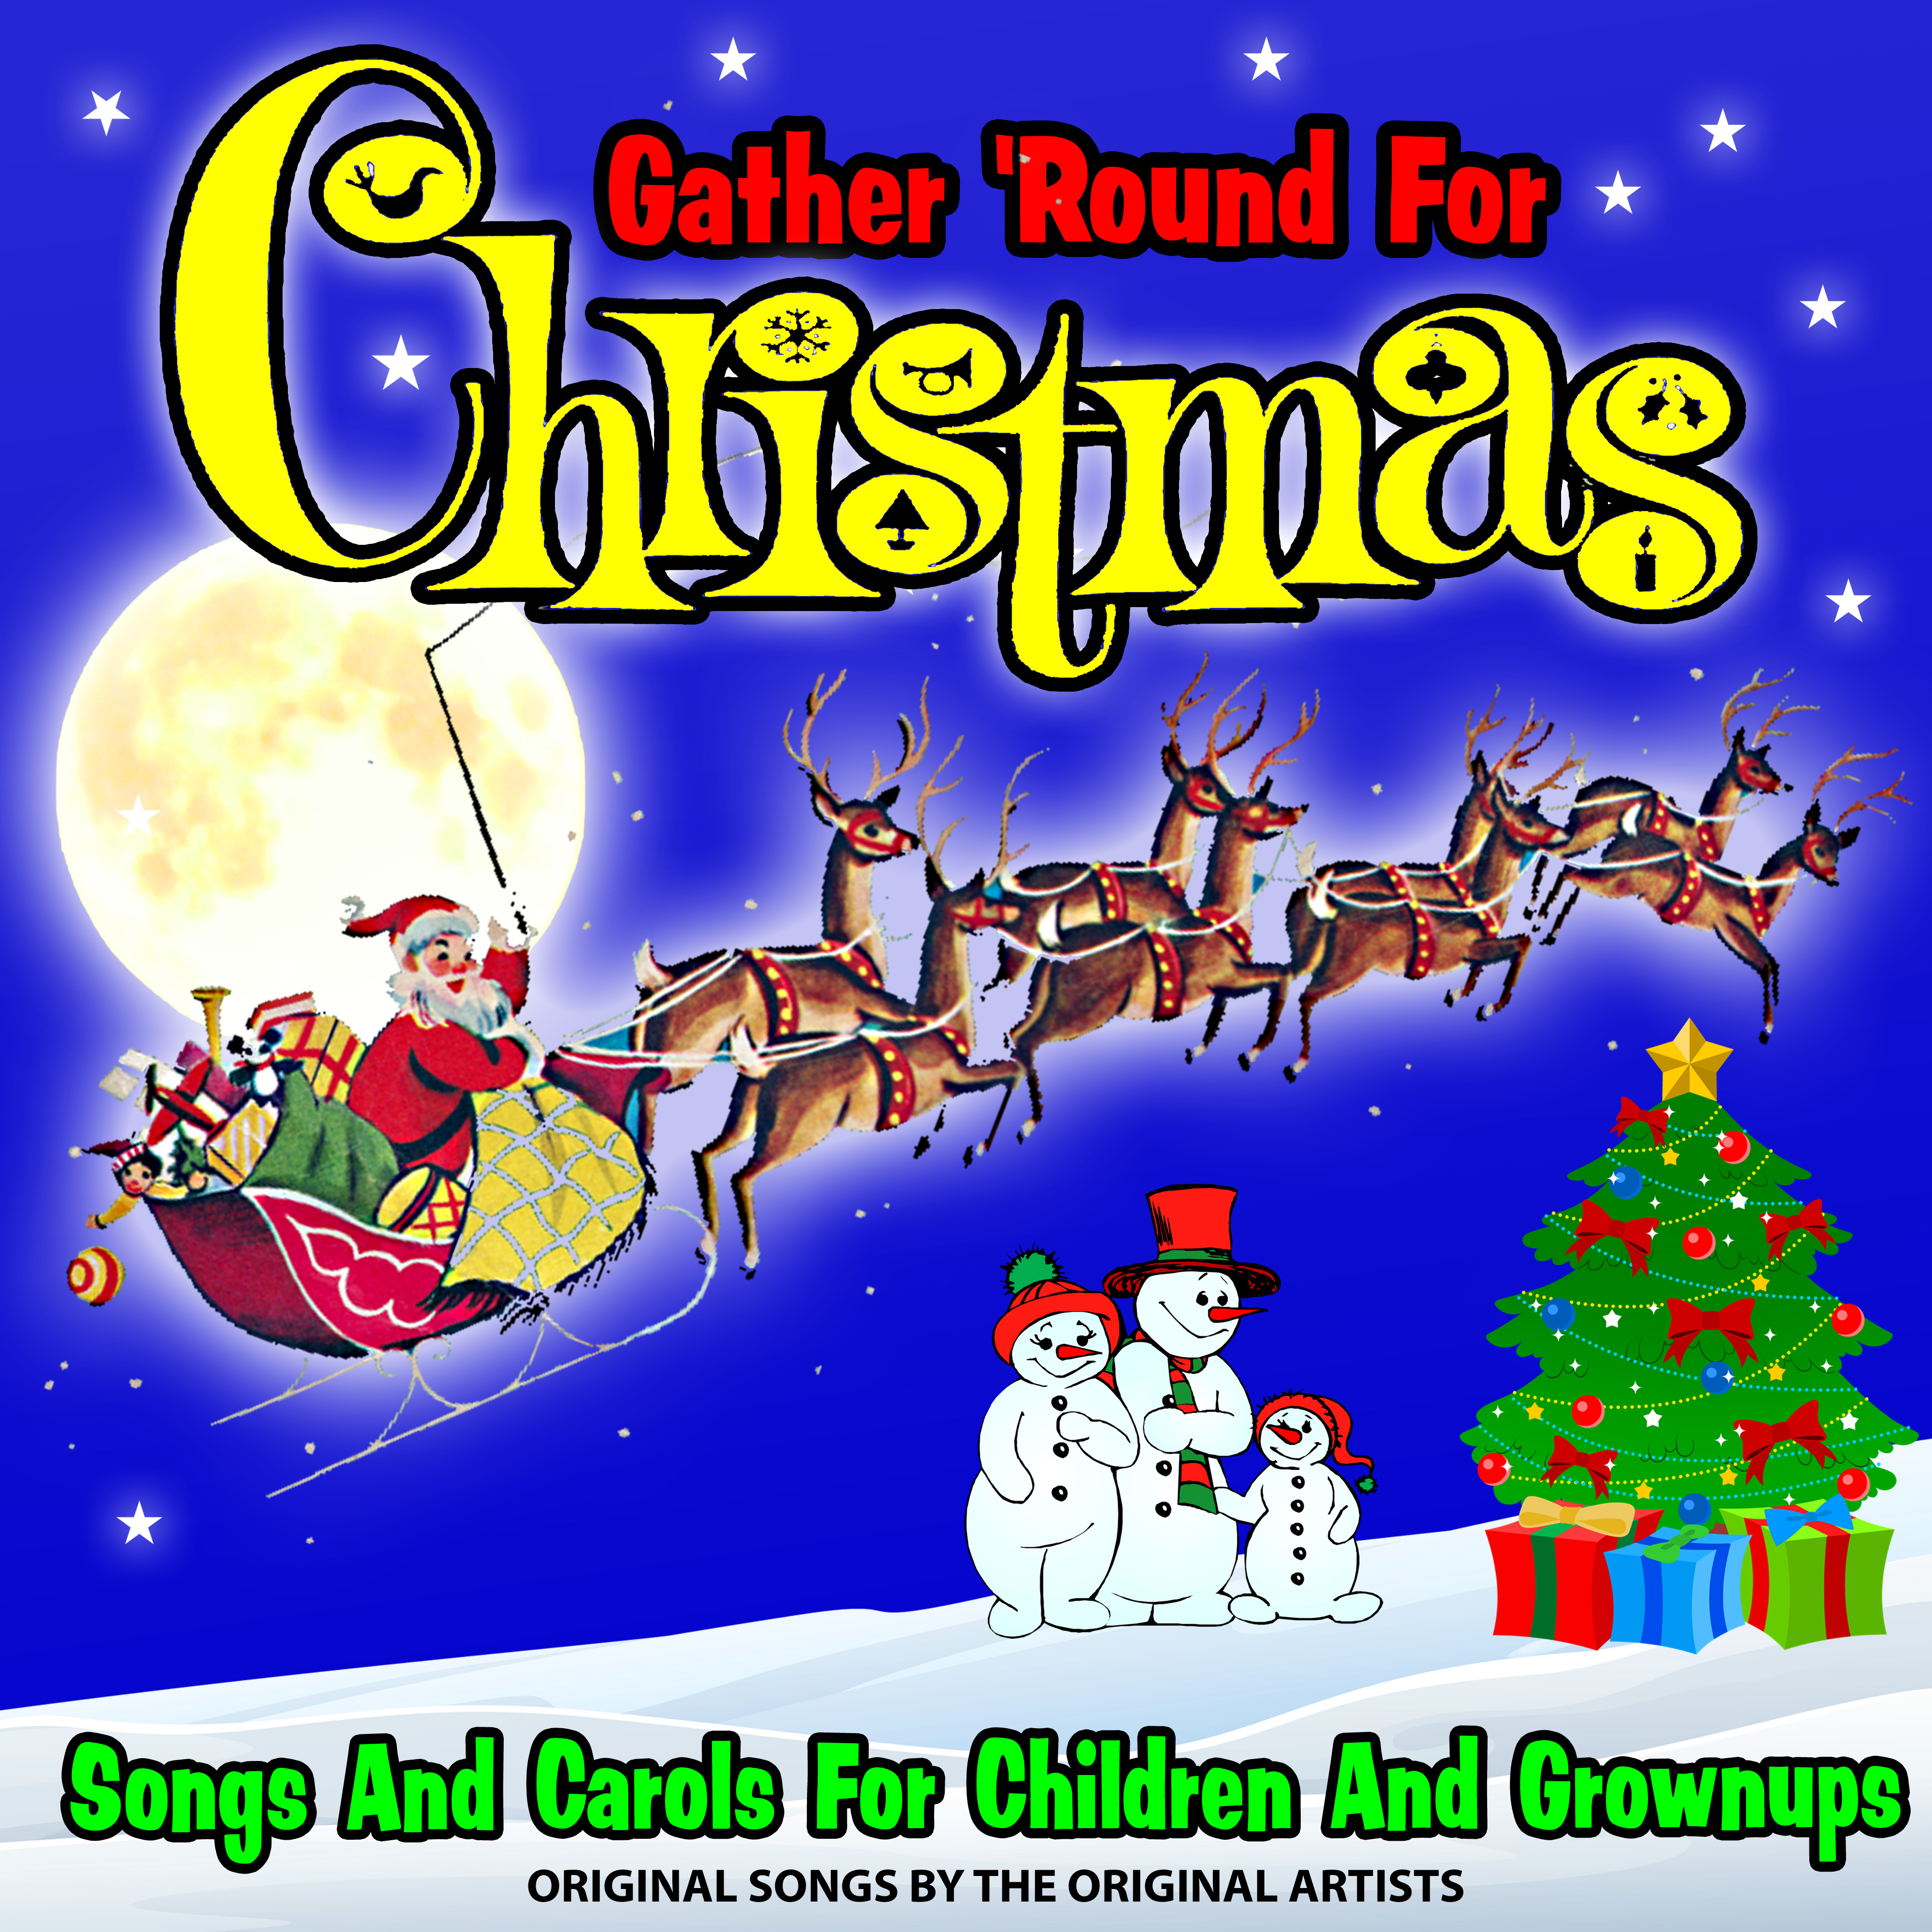 Gather 'Round for Christmas! : Songs and Carols for Children and Grownups!  : Original Songs by the Original Artists